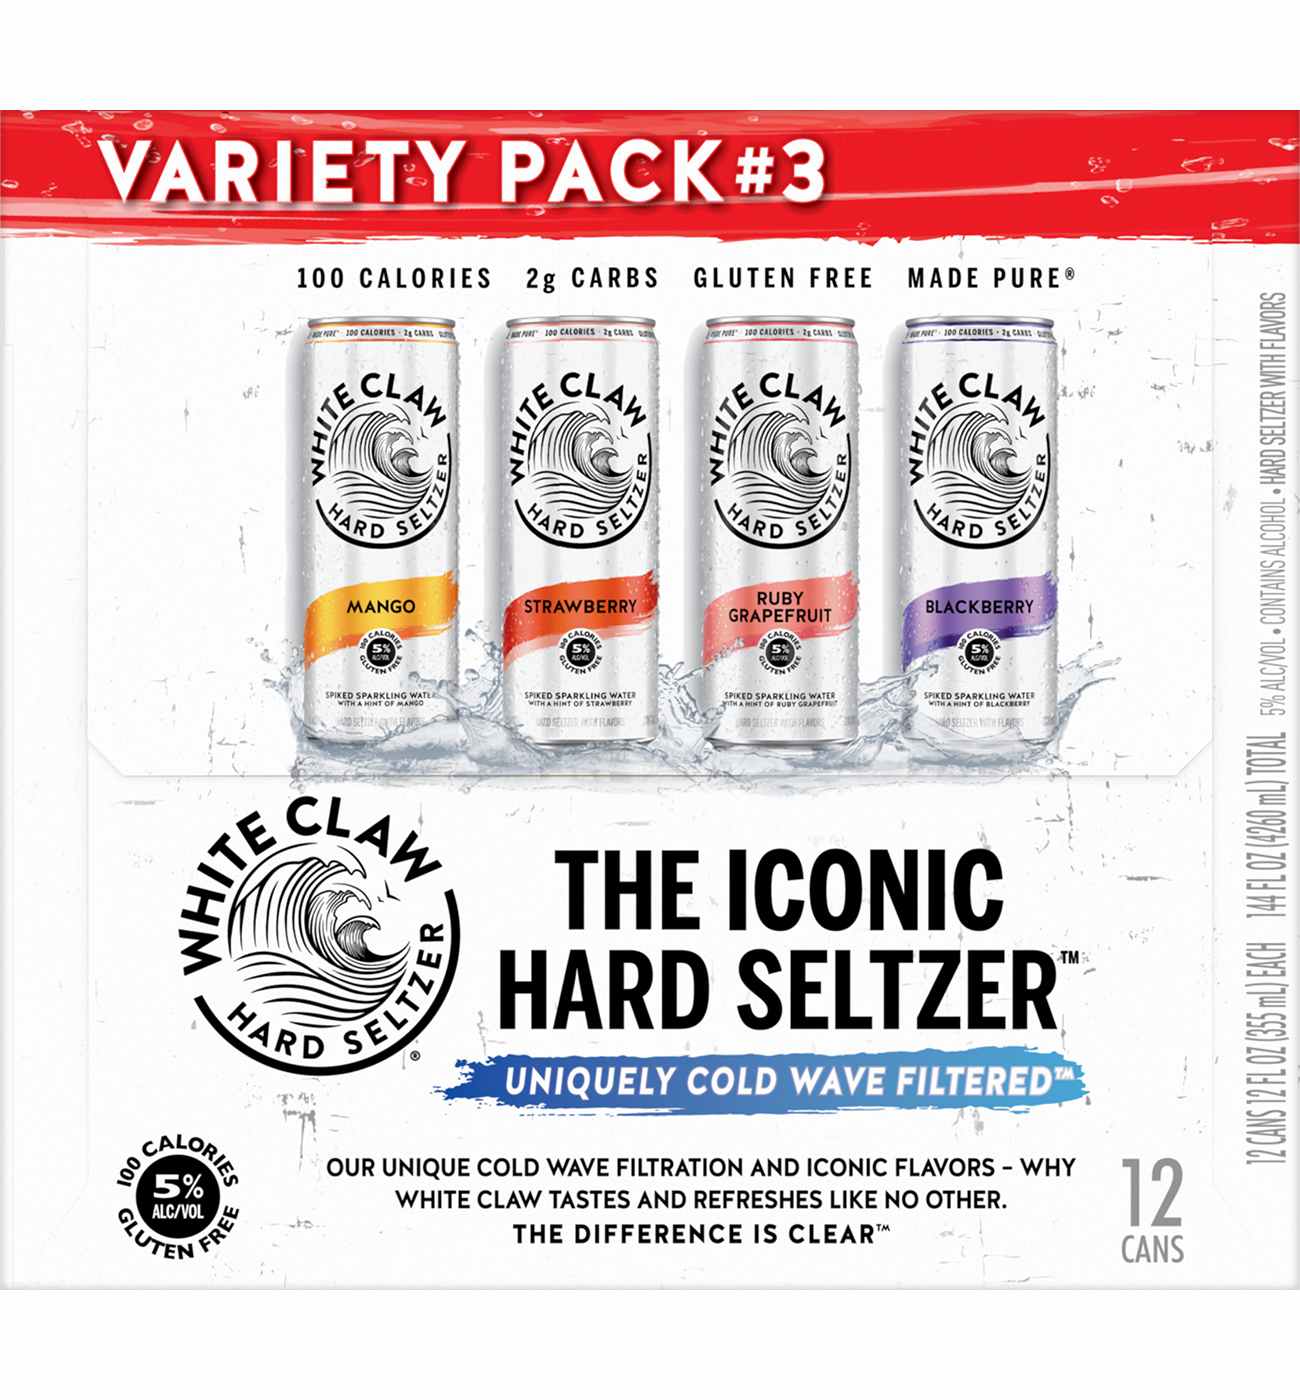 White Claw Hard Seltzer Variety Pack 12 pk Cans - Flavor Collection No. 3; image 2 of 4